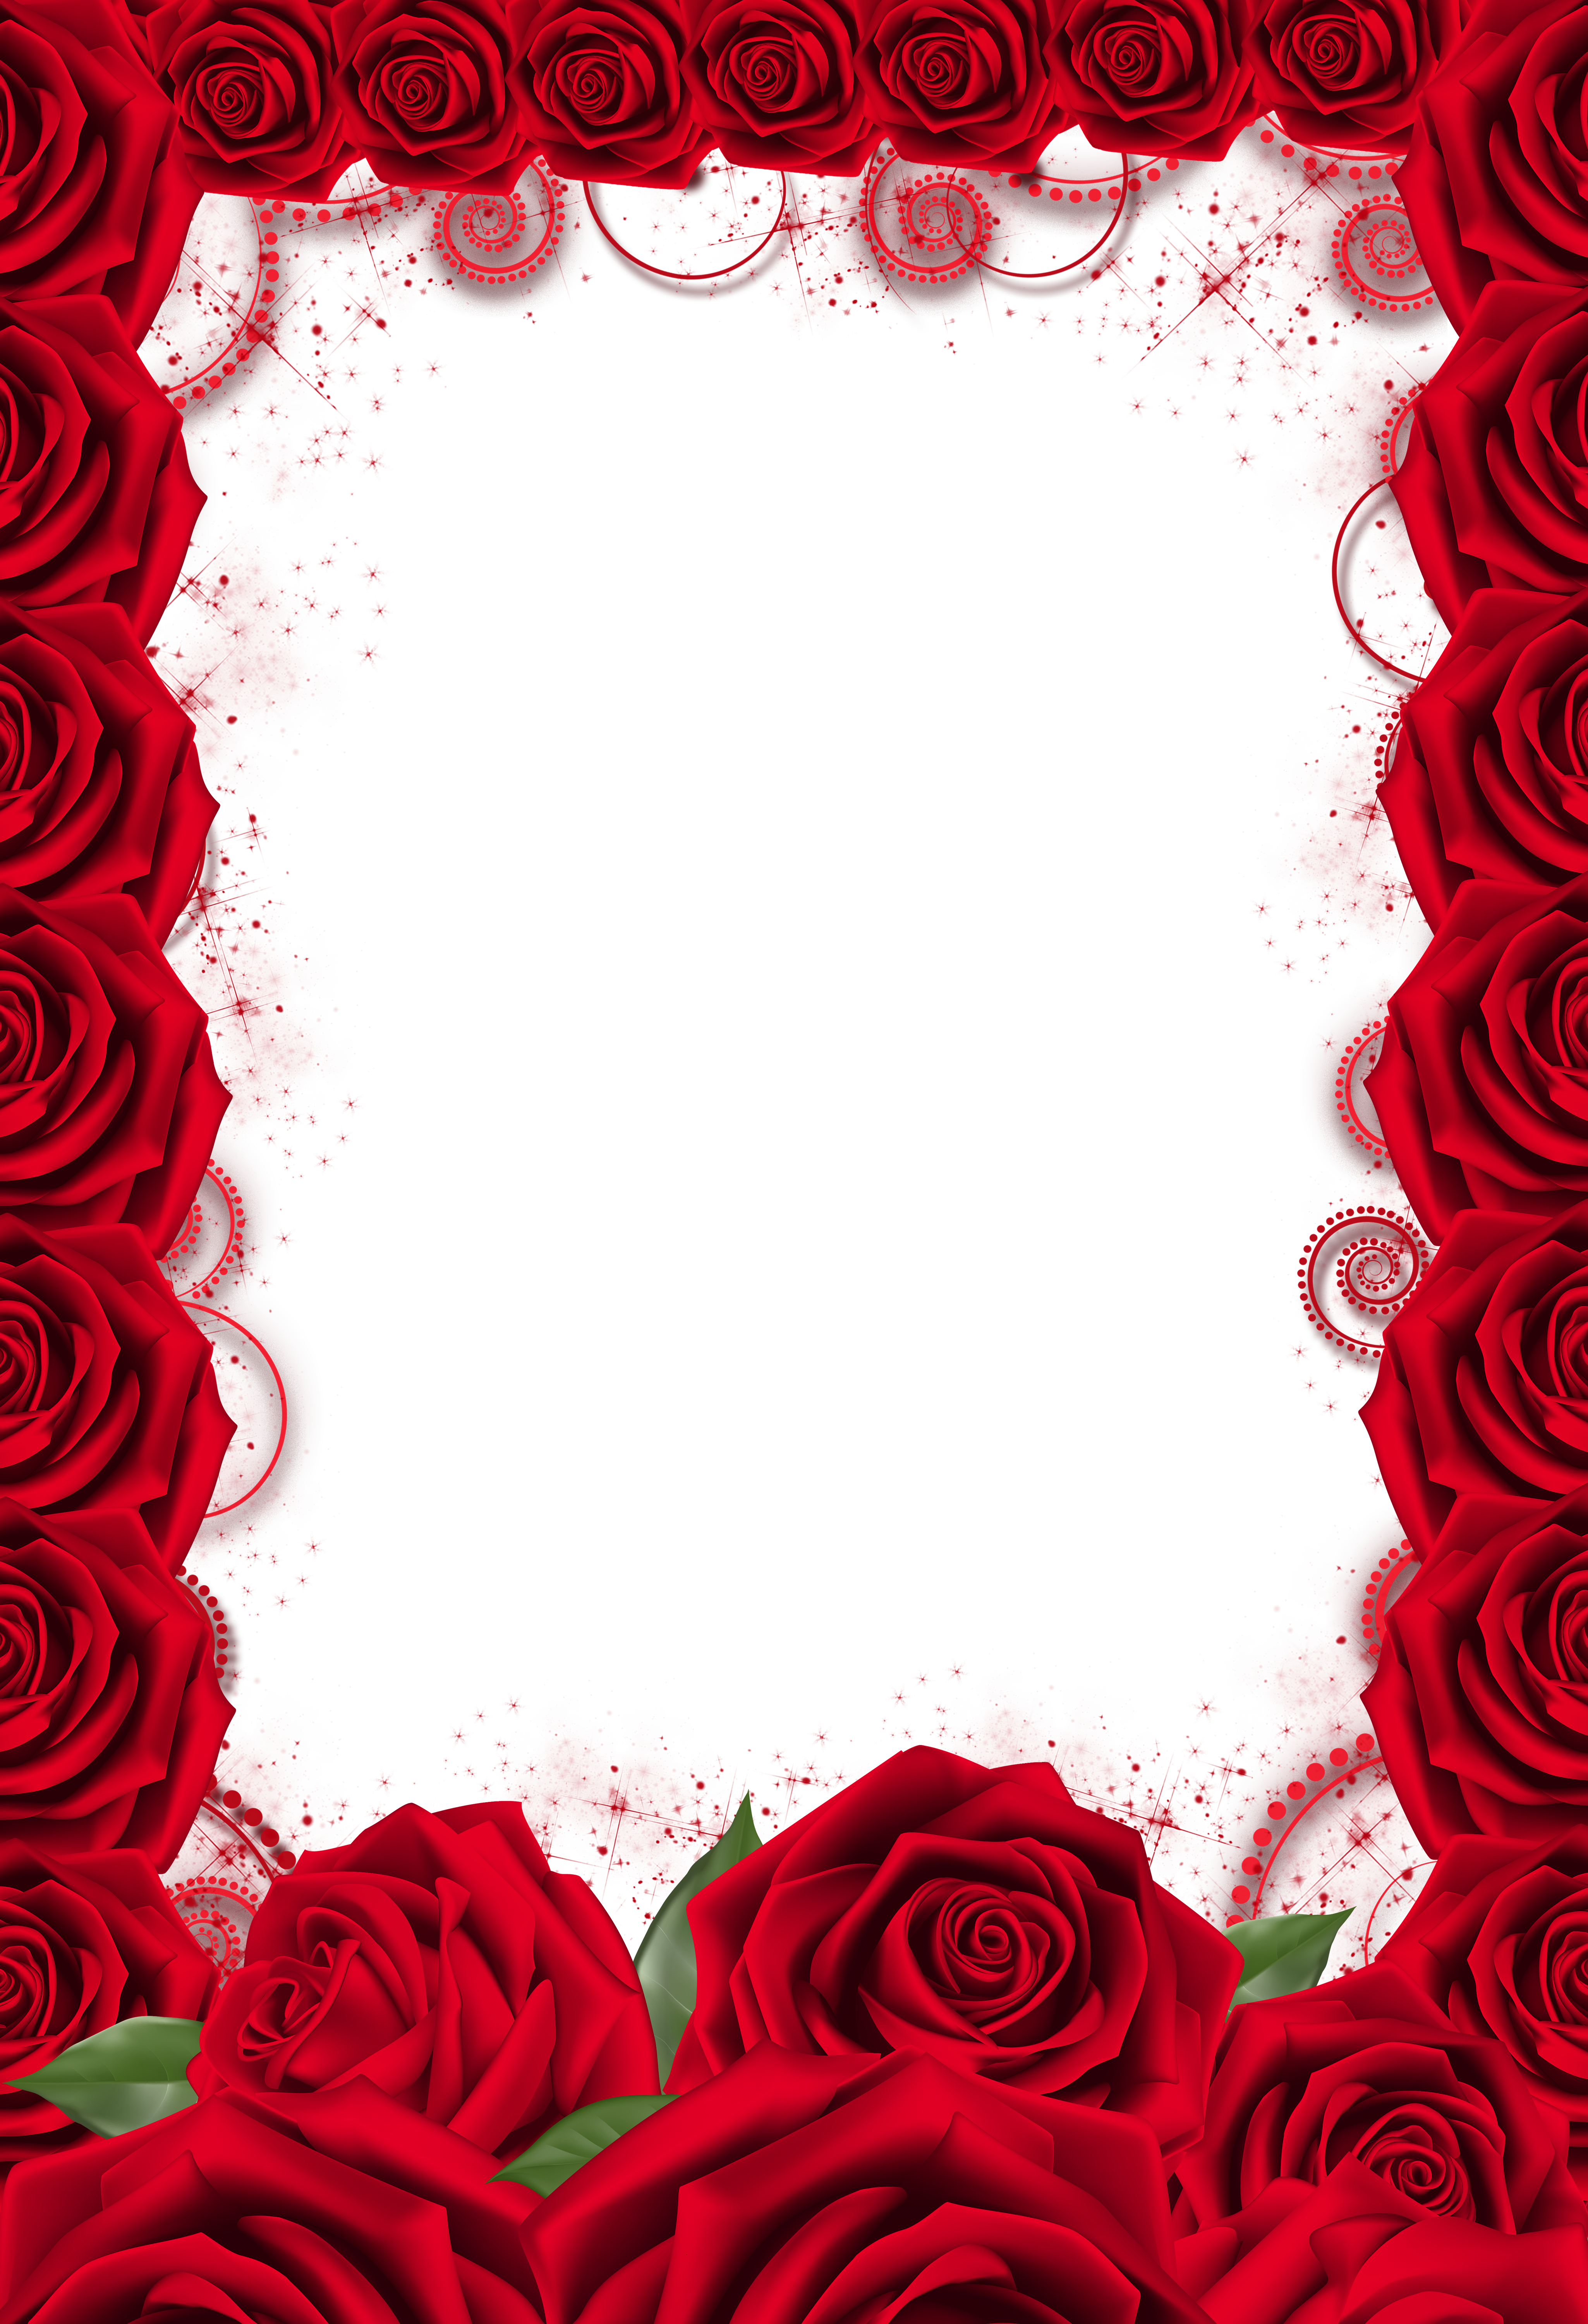 red rose transparent png frame gallery yopriceville high quality images and transparent png free clipart gallery yopriceville